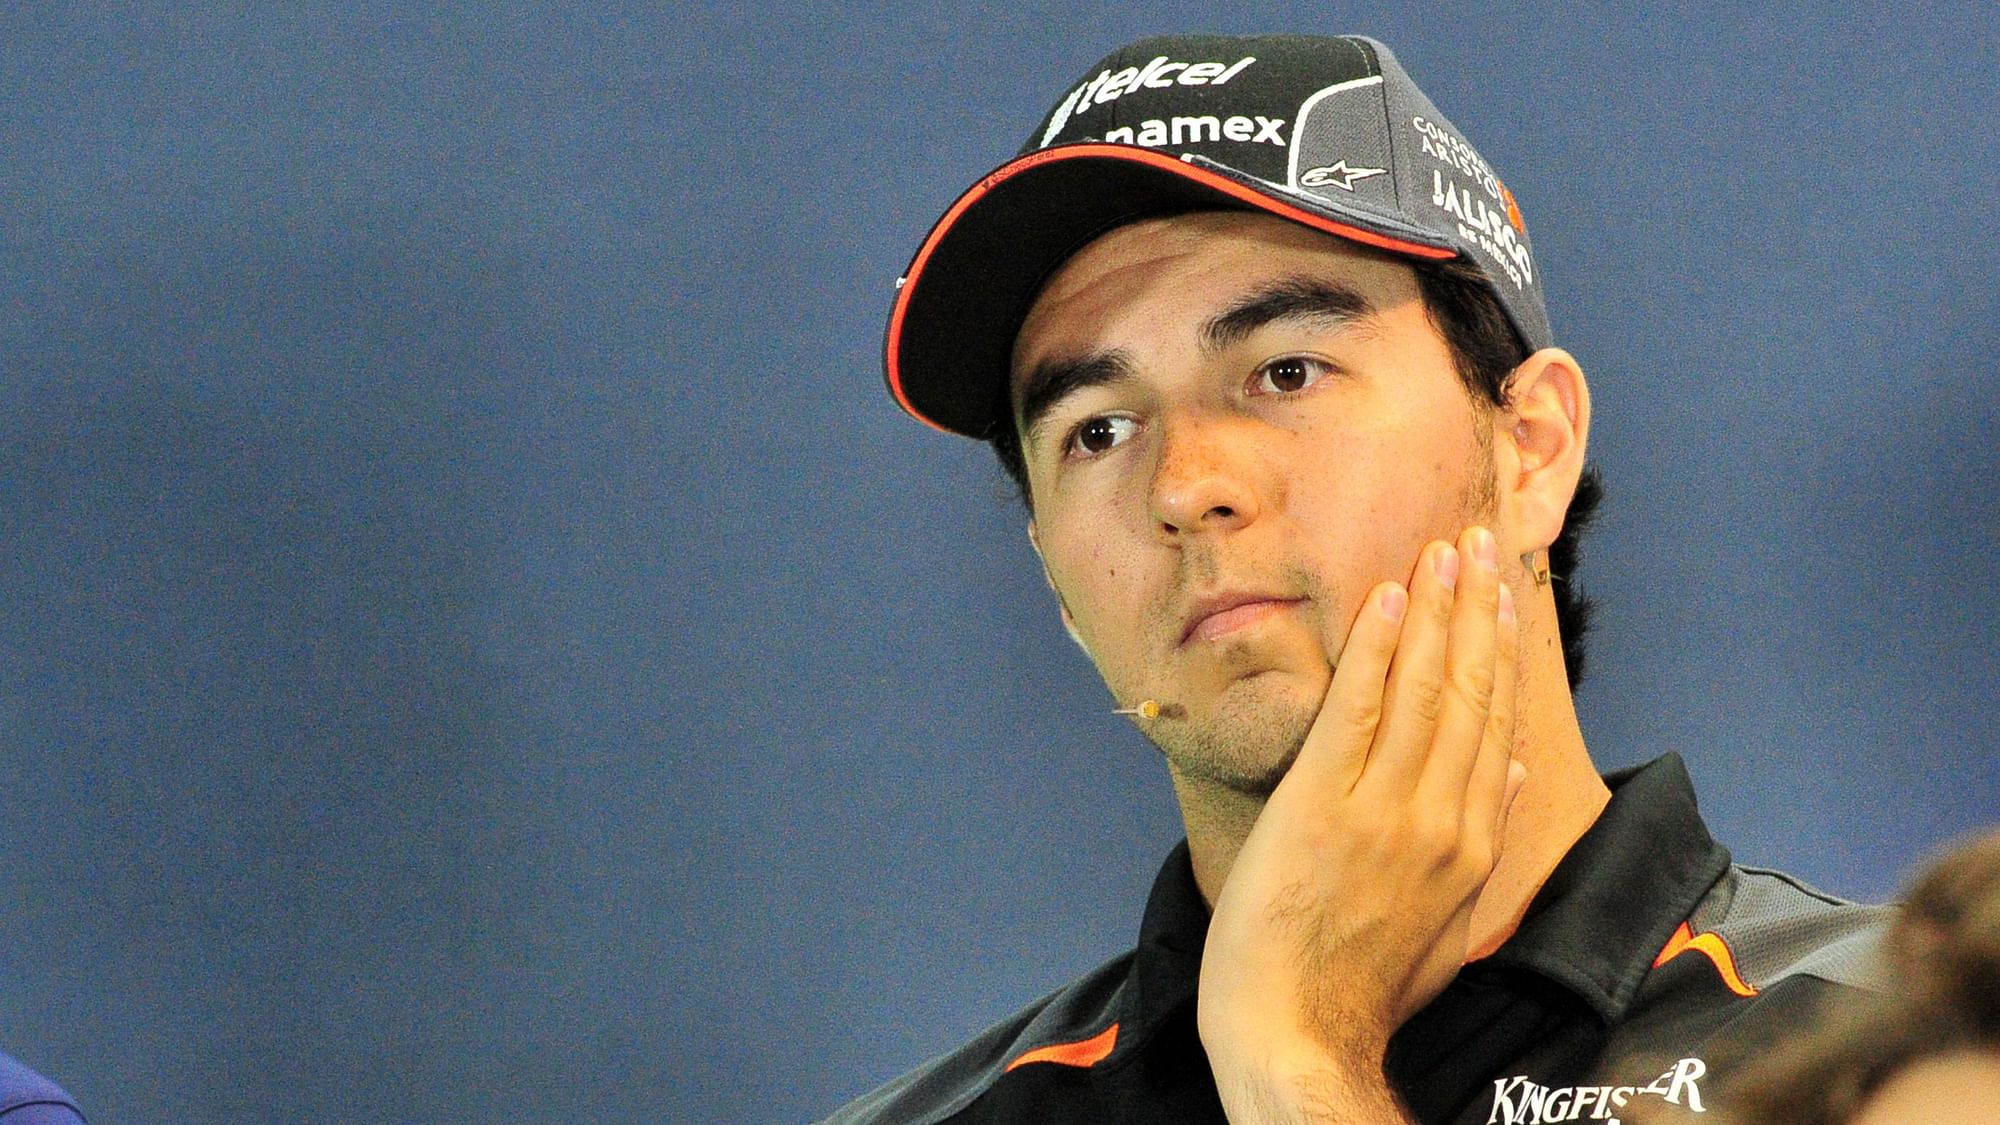 F1 team Racing Point’s driver Sergio Perez has tested positive for coronavirus.